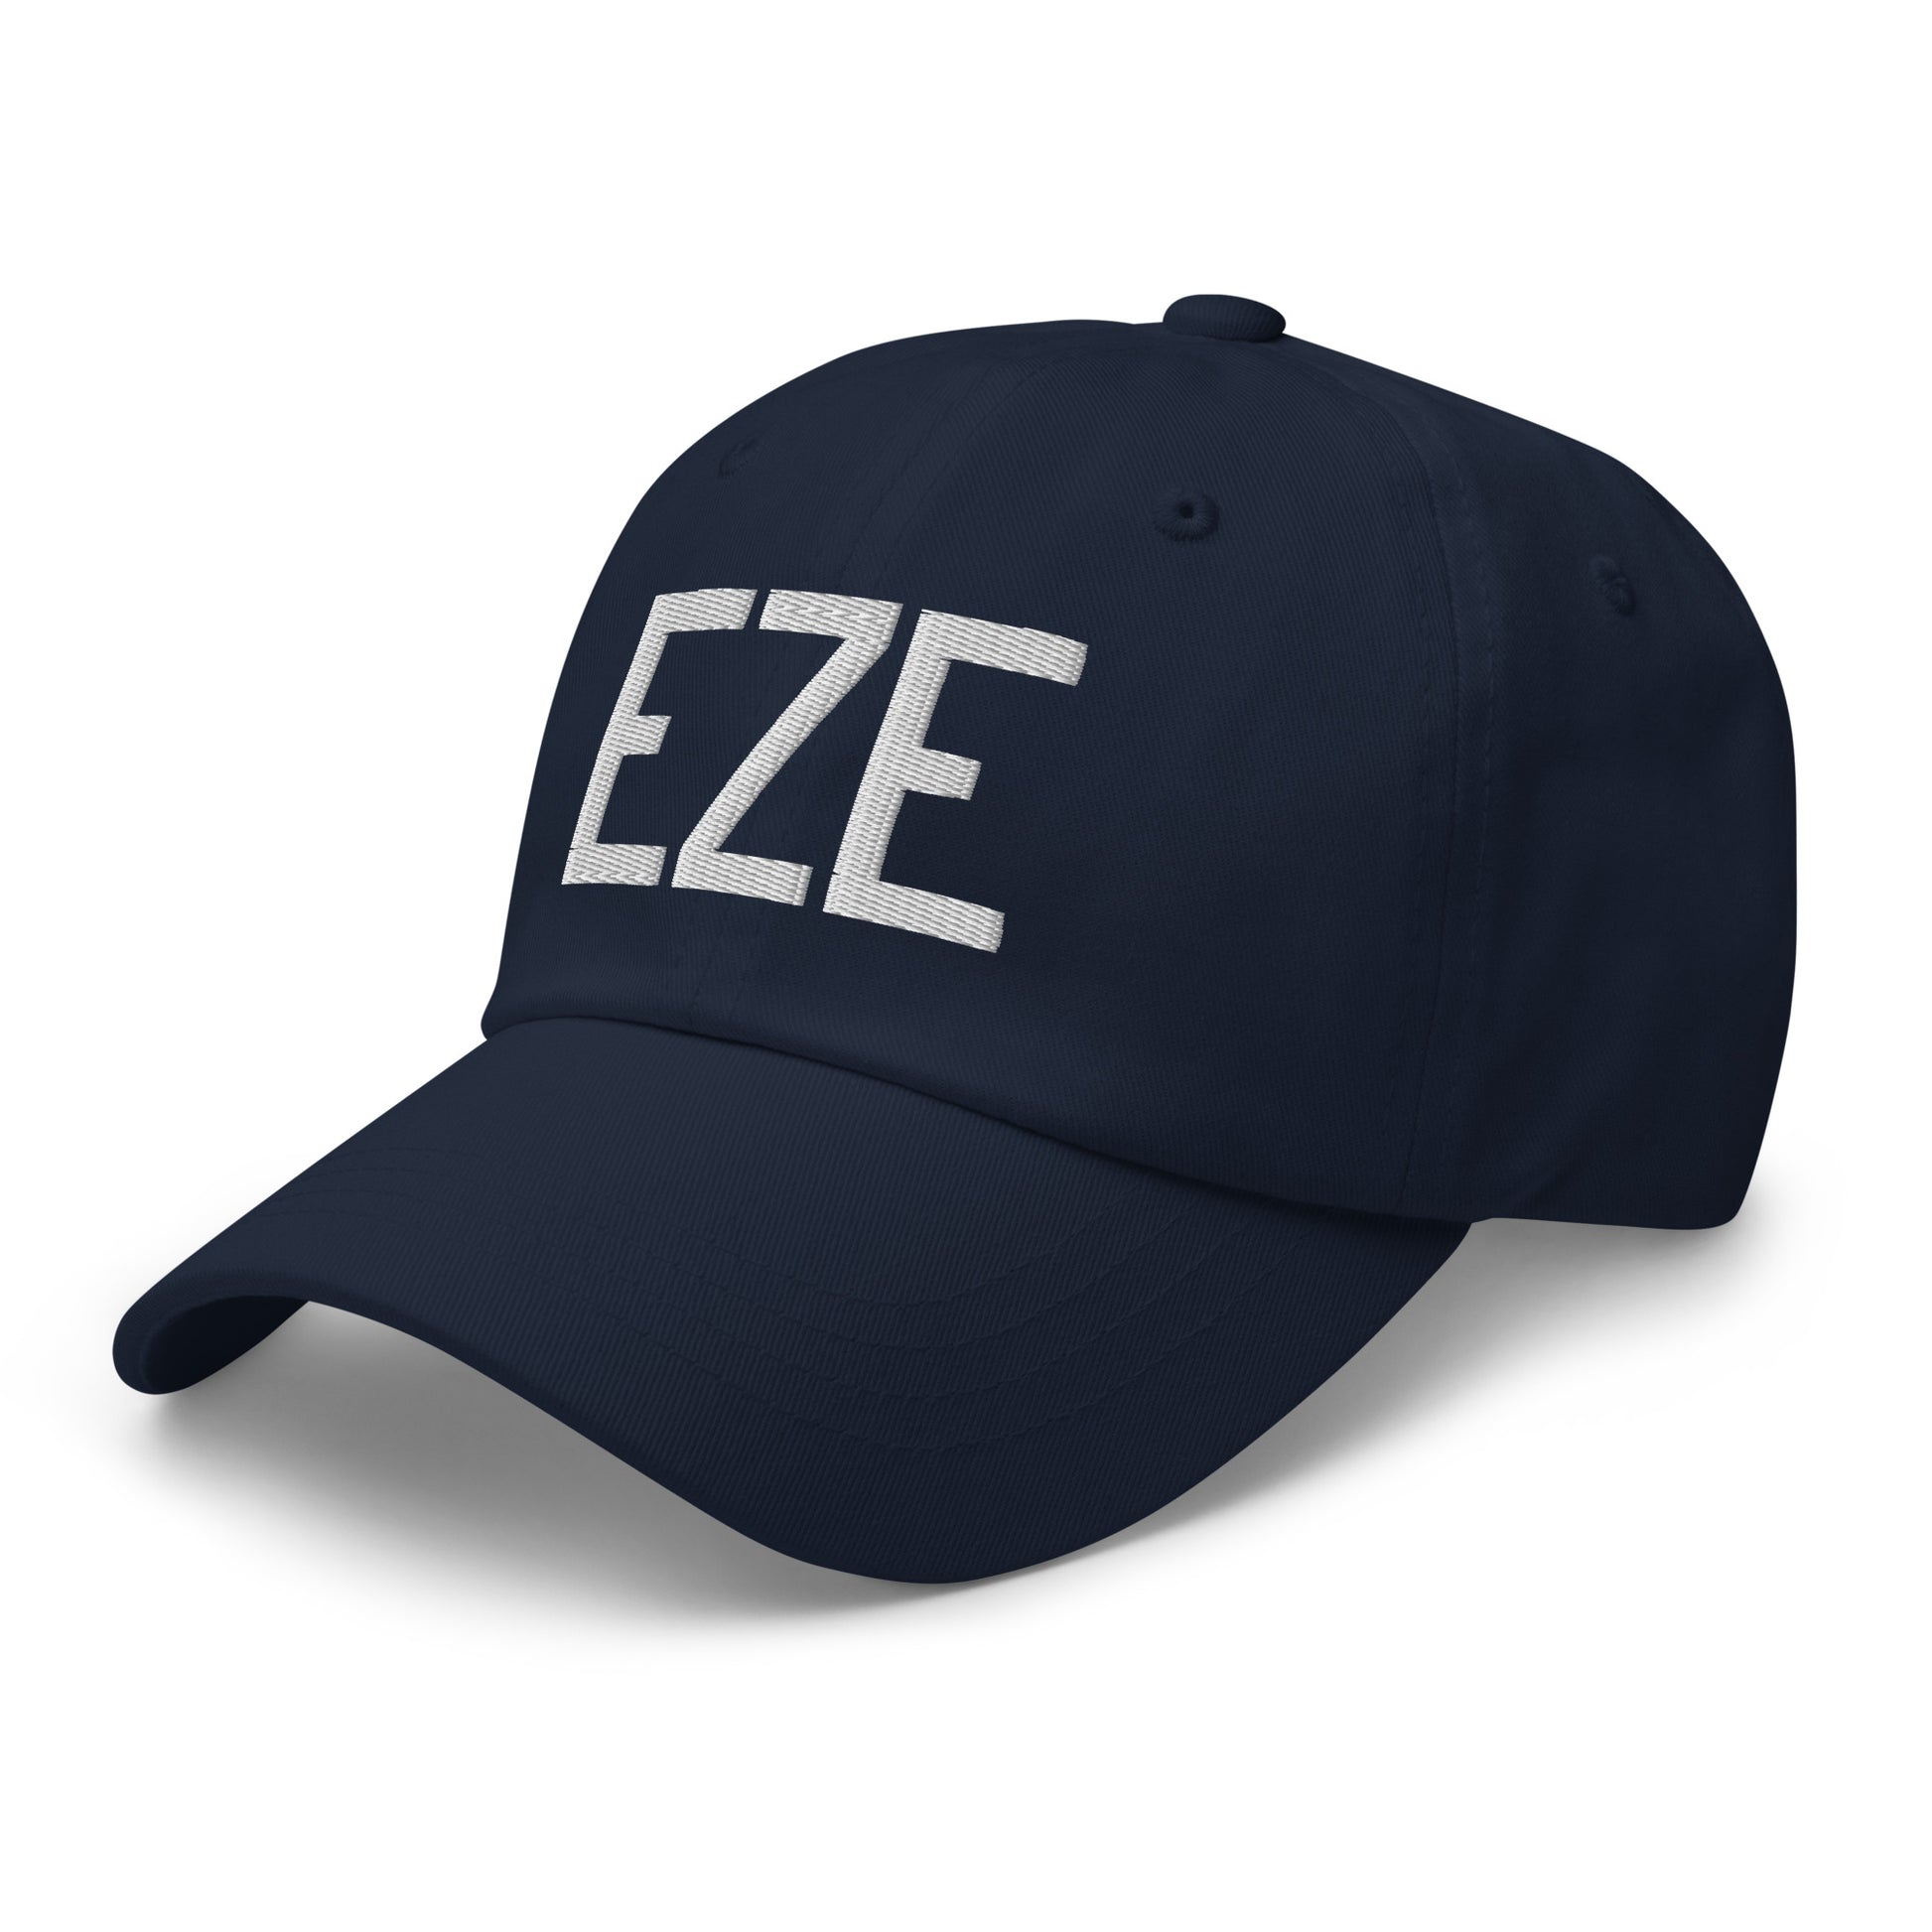 Airport Code Baseball Cap - White • EZE Buenos Aires • YHM Designs - Image 18